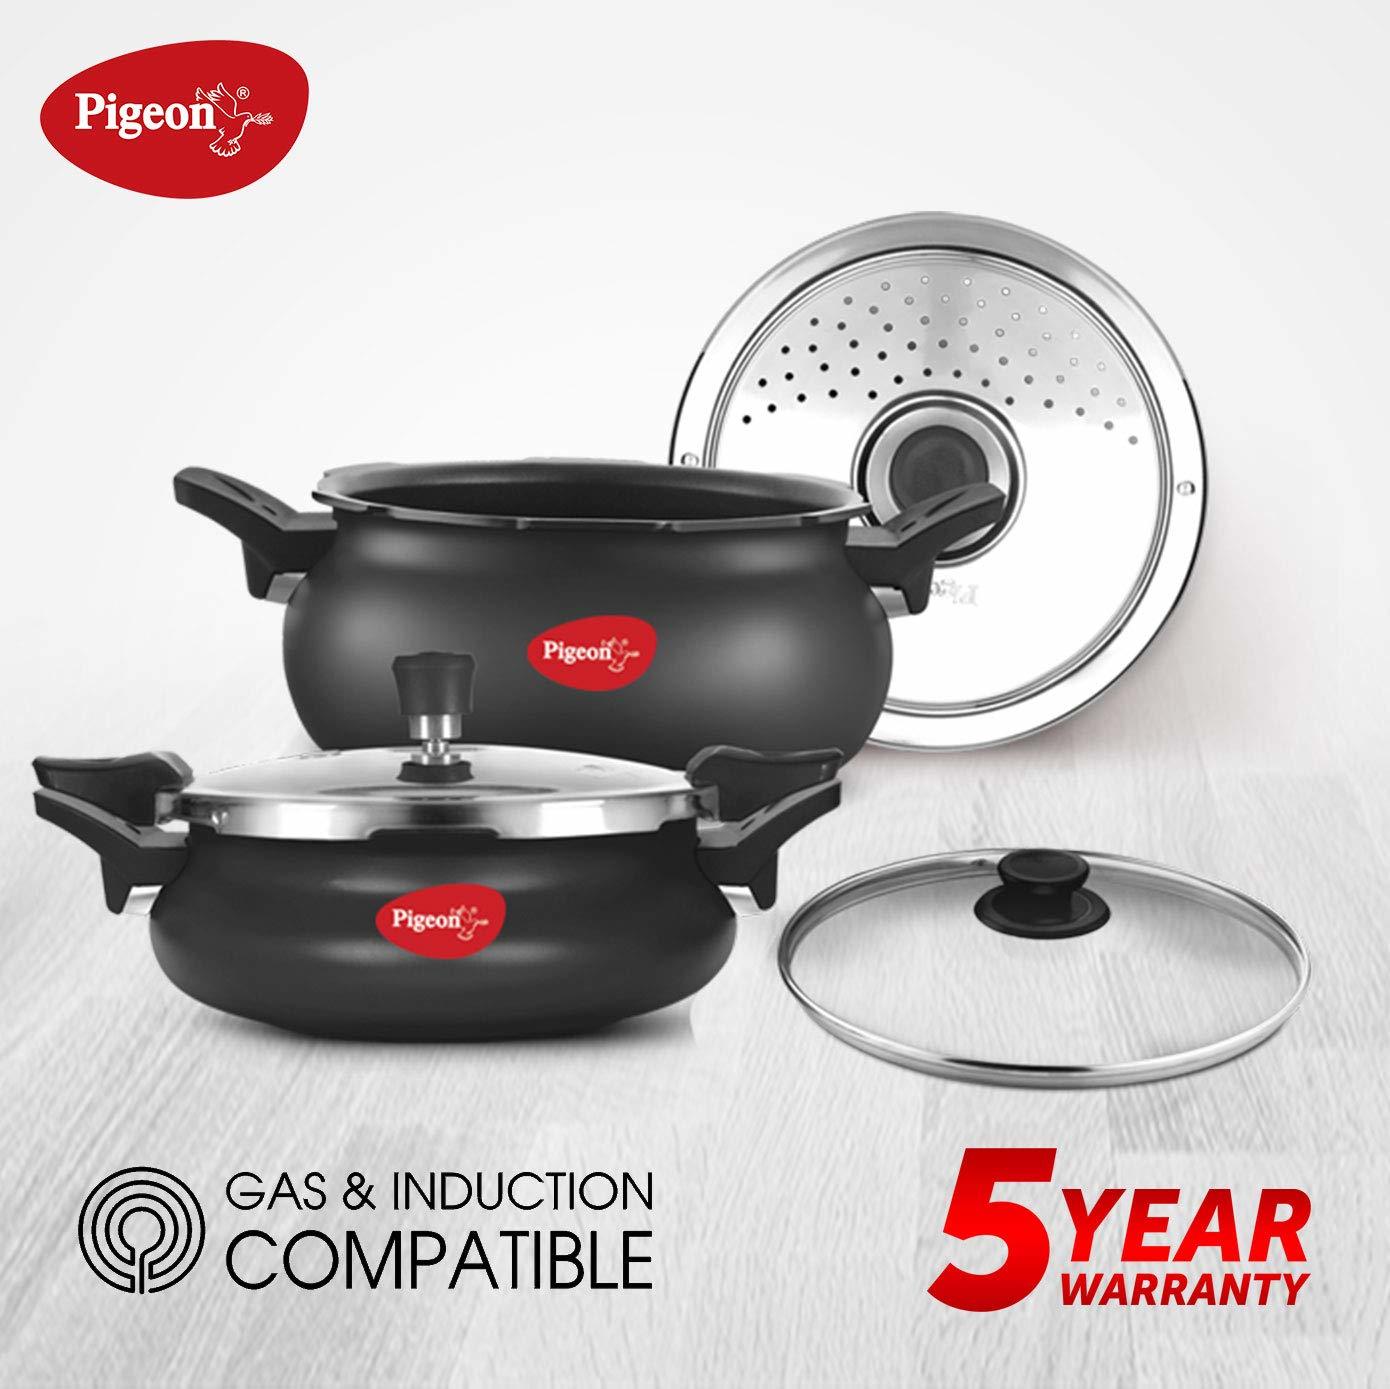 Pigeon by Stovekraft All in One Value Pack Hard Anodized Cooker Set, 5-Pieces, Black